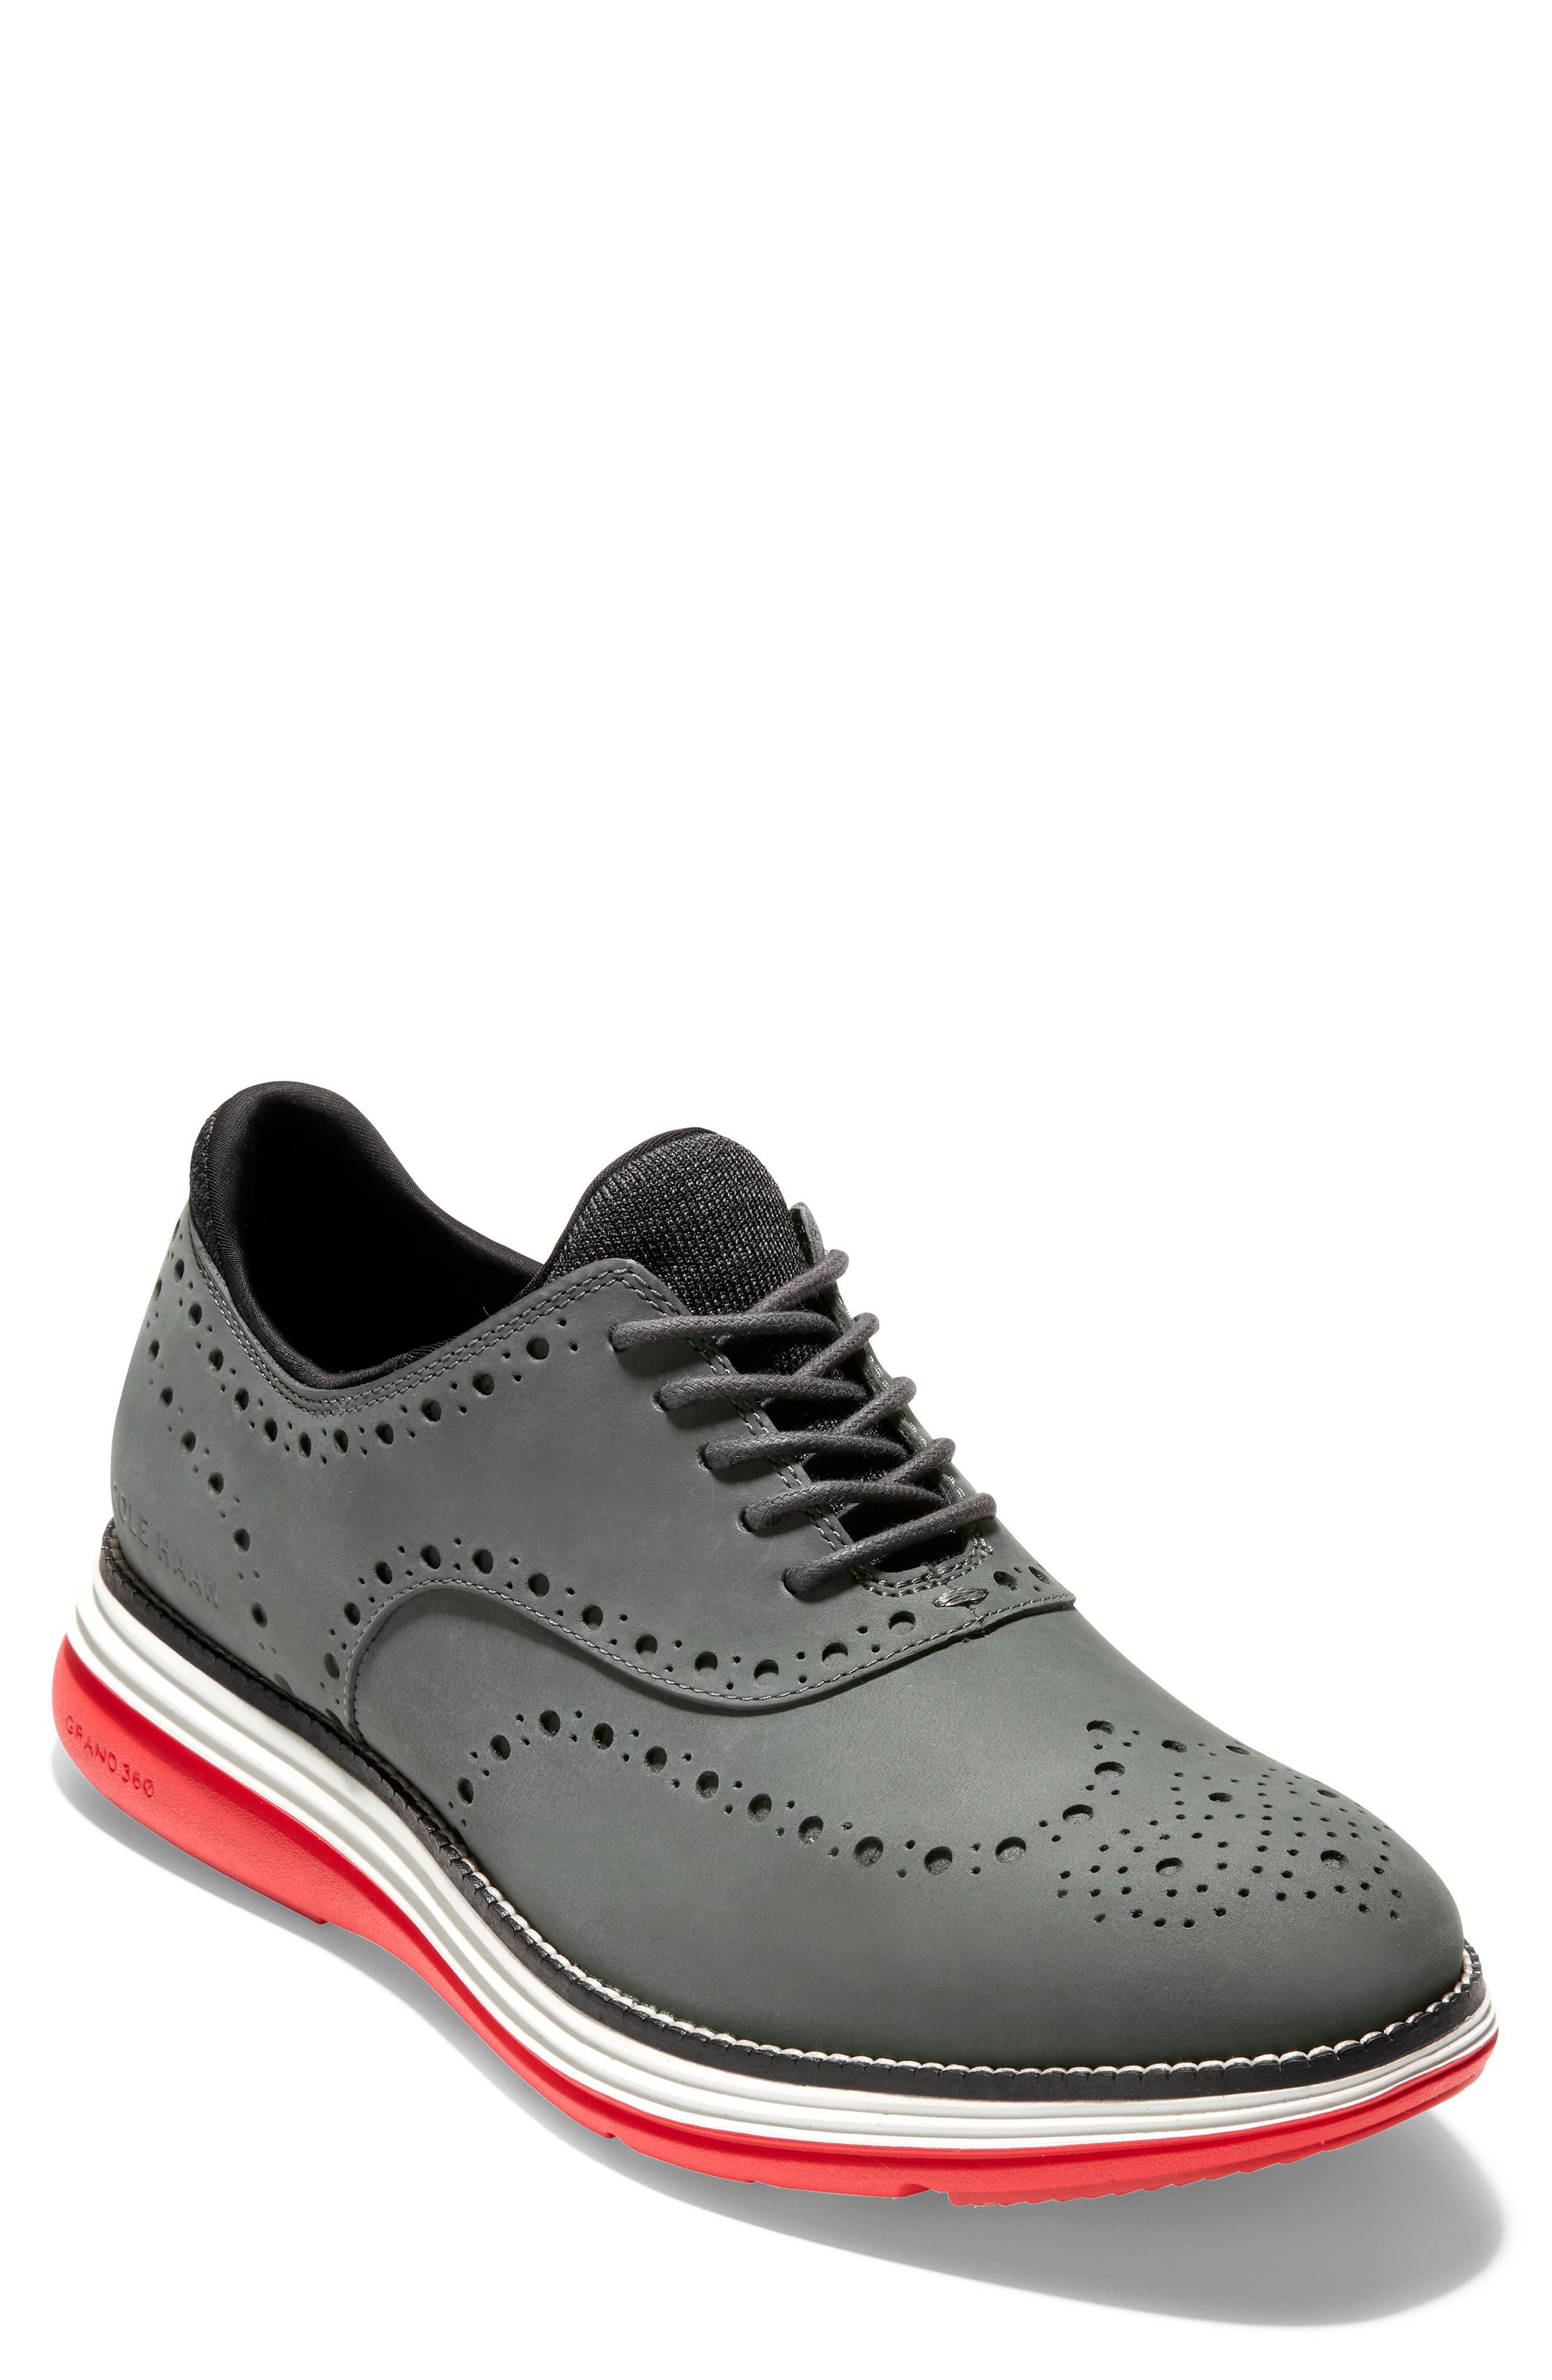 cole haan grey shoes